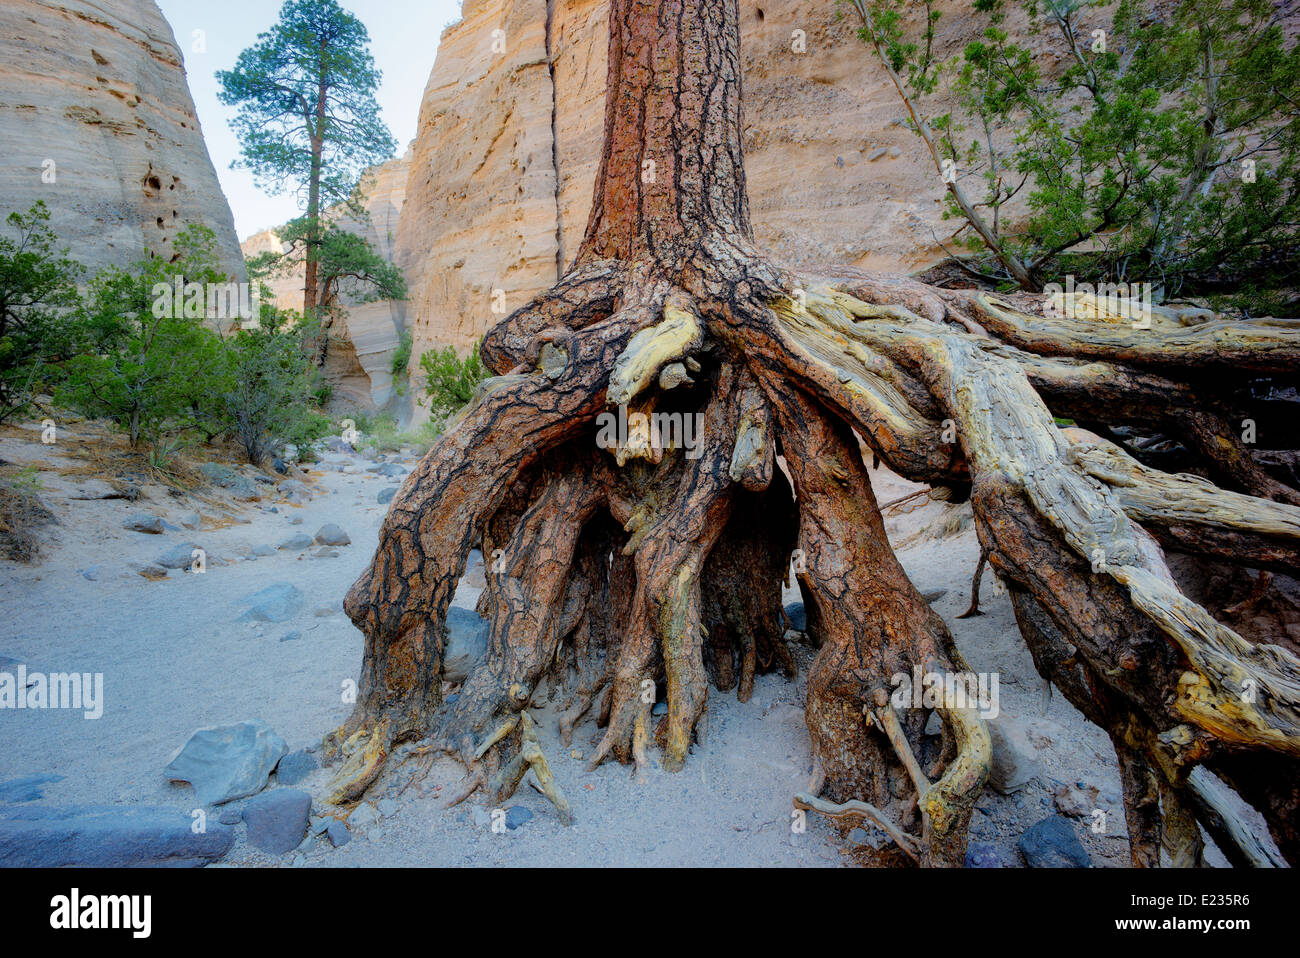 Exposed roots of Ponderosa Pine Tree in eroded streambed. Tent Rocks National Monument. Kasha-Katuwe,New Mexico Stock Photo